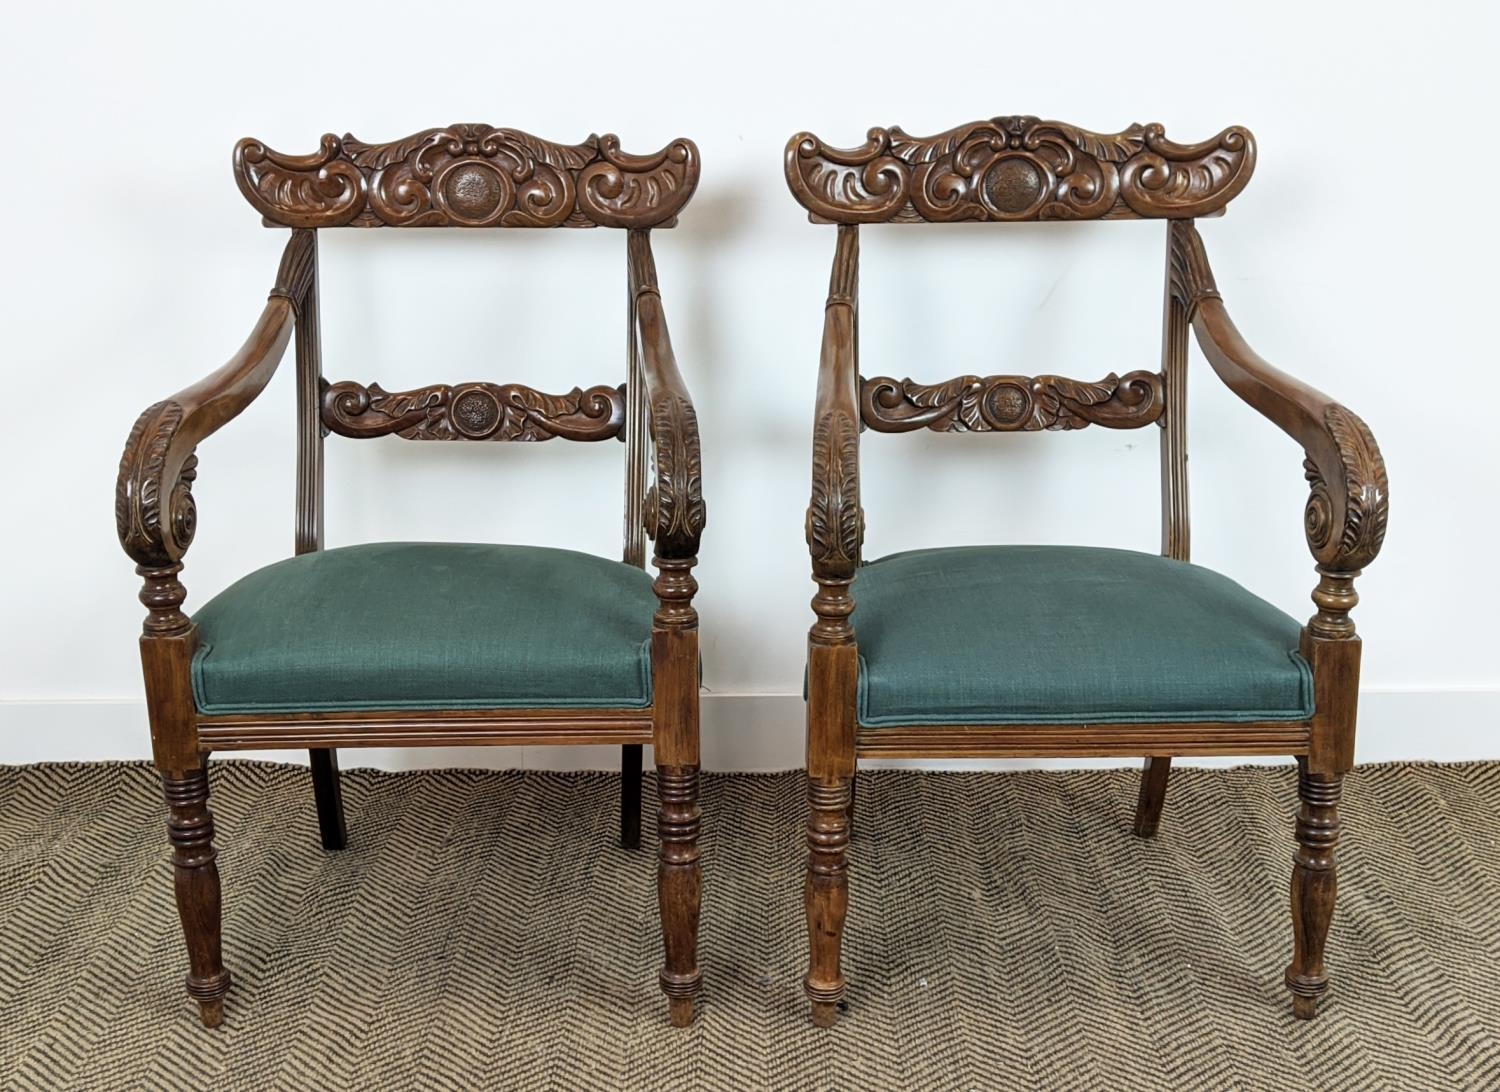 ARMCHAIRS, a pair, mid 19th century mahogany with green stuffover seats, 91cm H x 58cm x 58cm. (2)